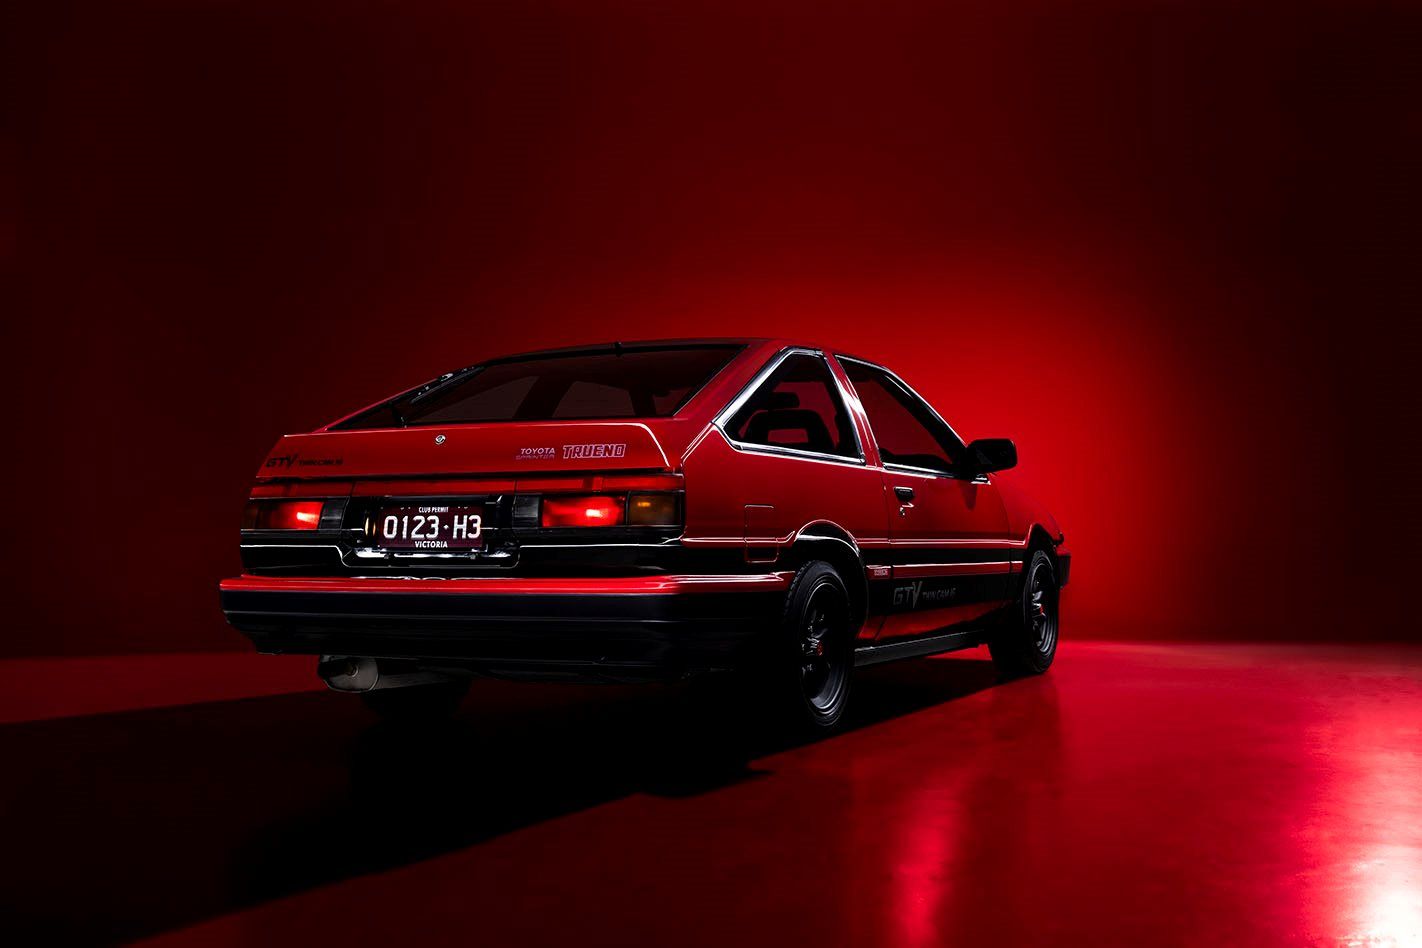 Red car in a red room - Toyota AE86